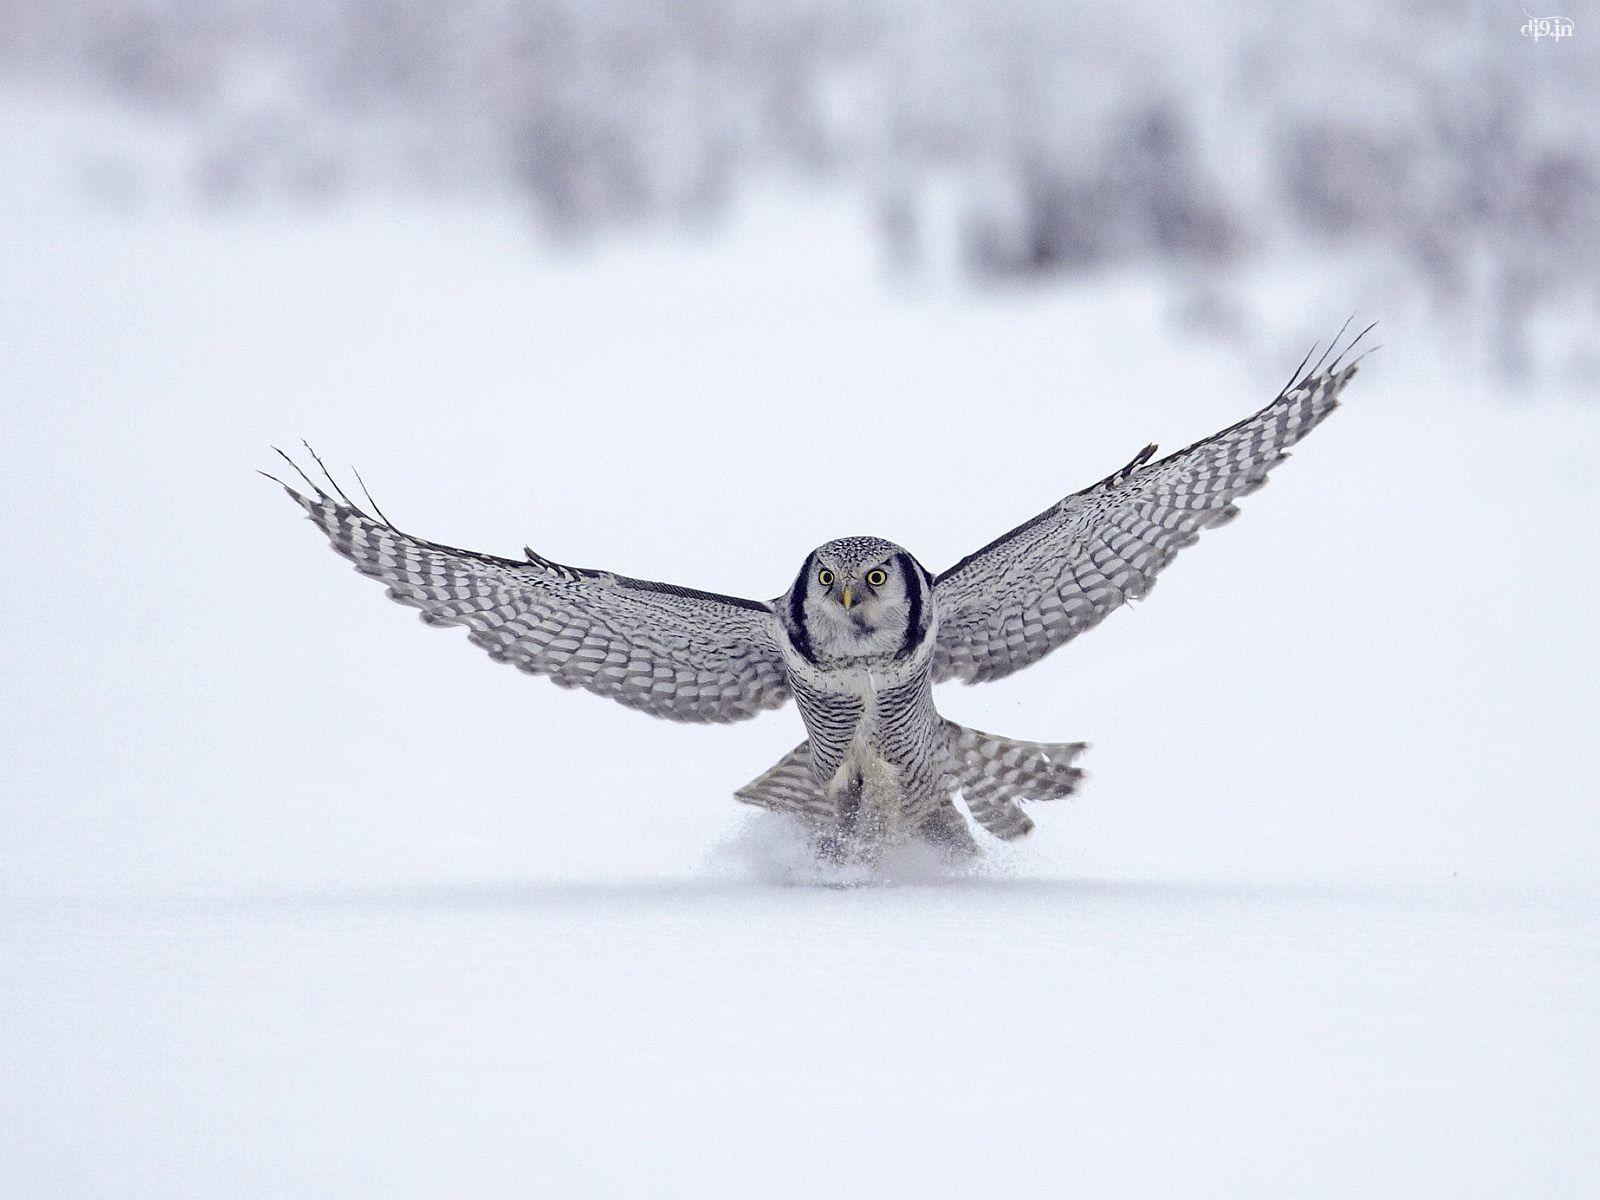 Snowy Owl Bird HD Wallpaper Android Apps on Google Play